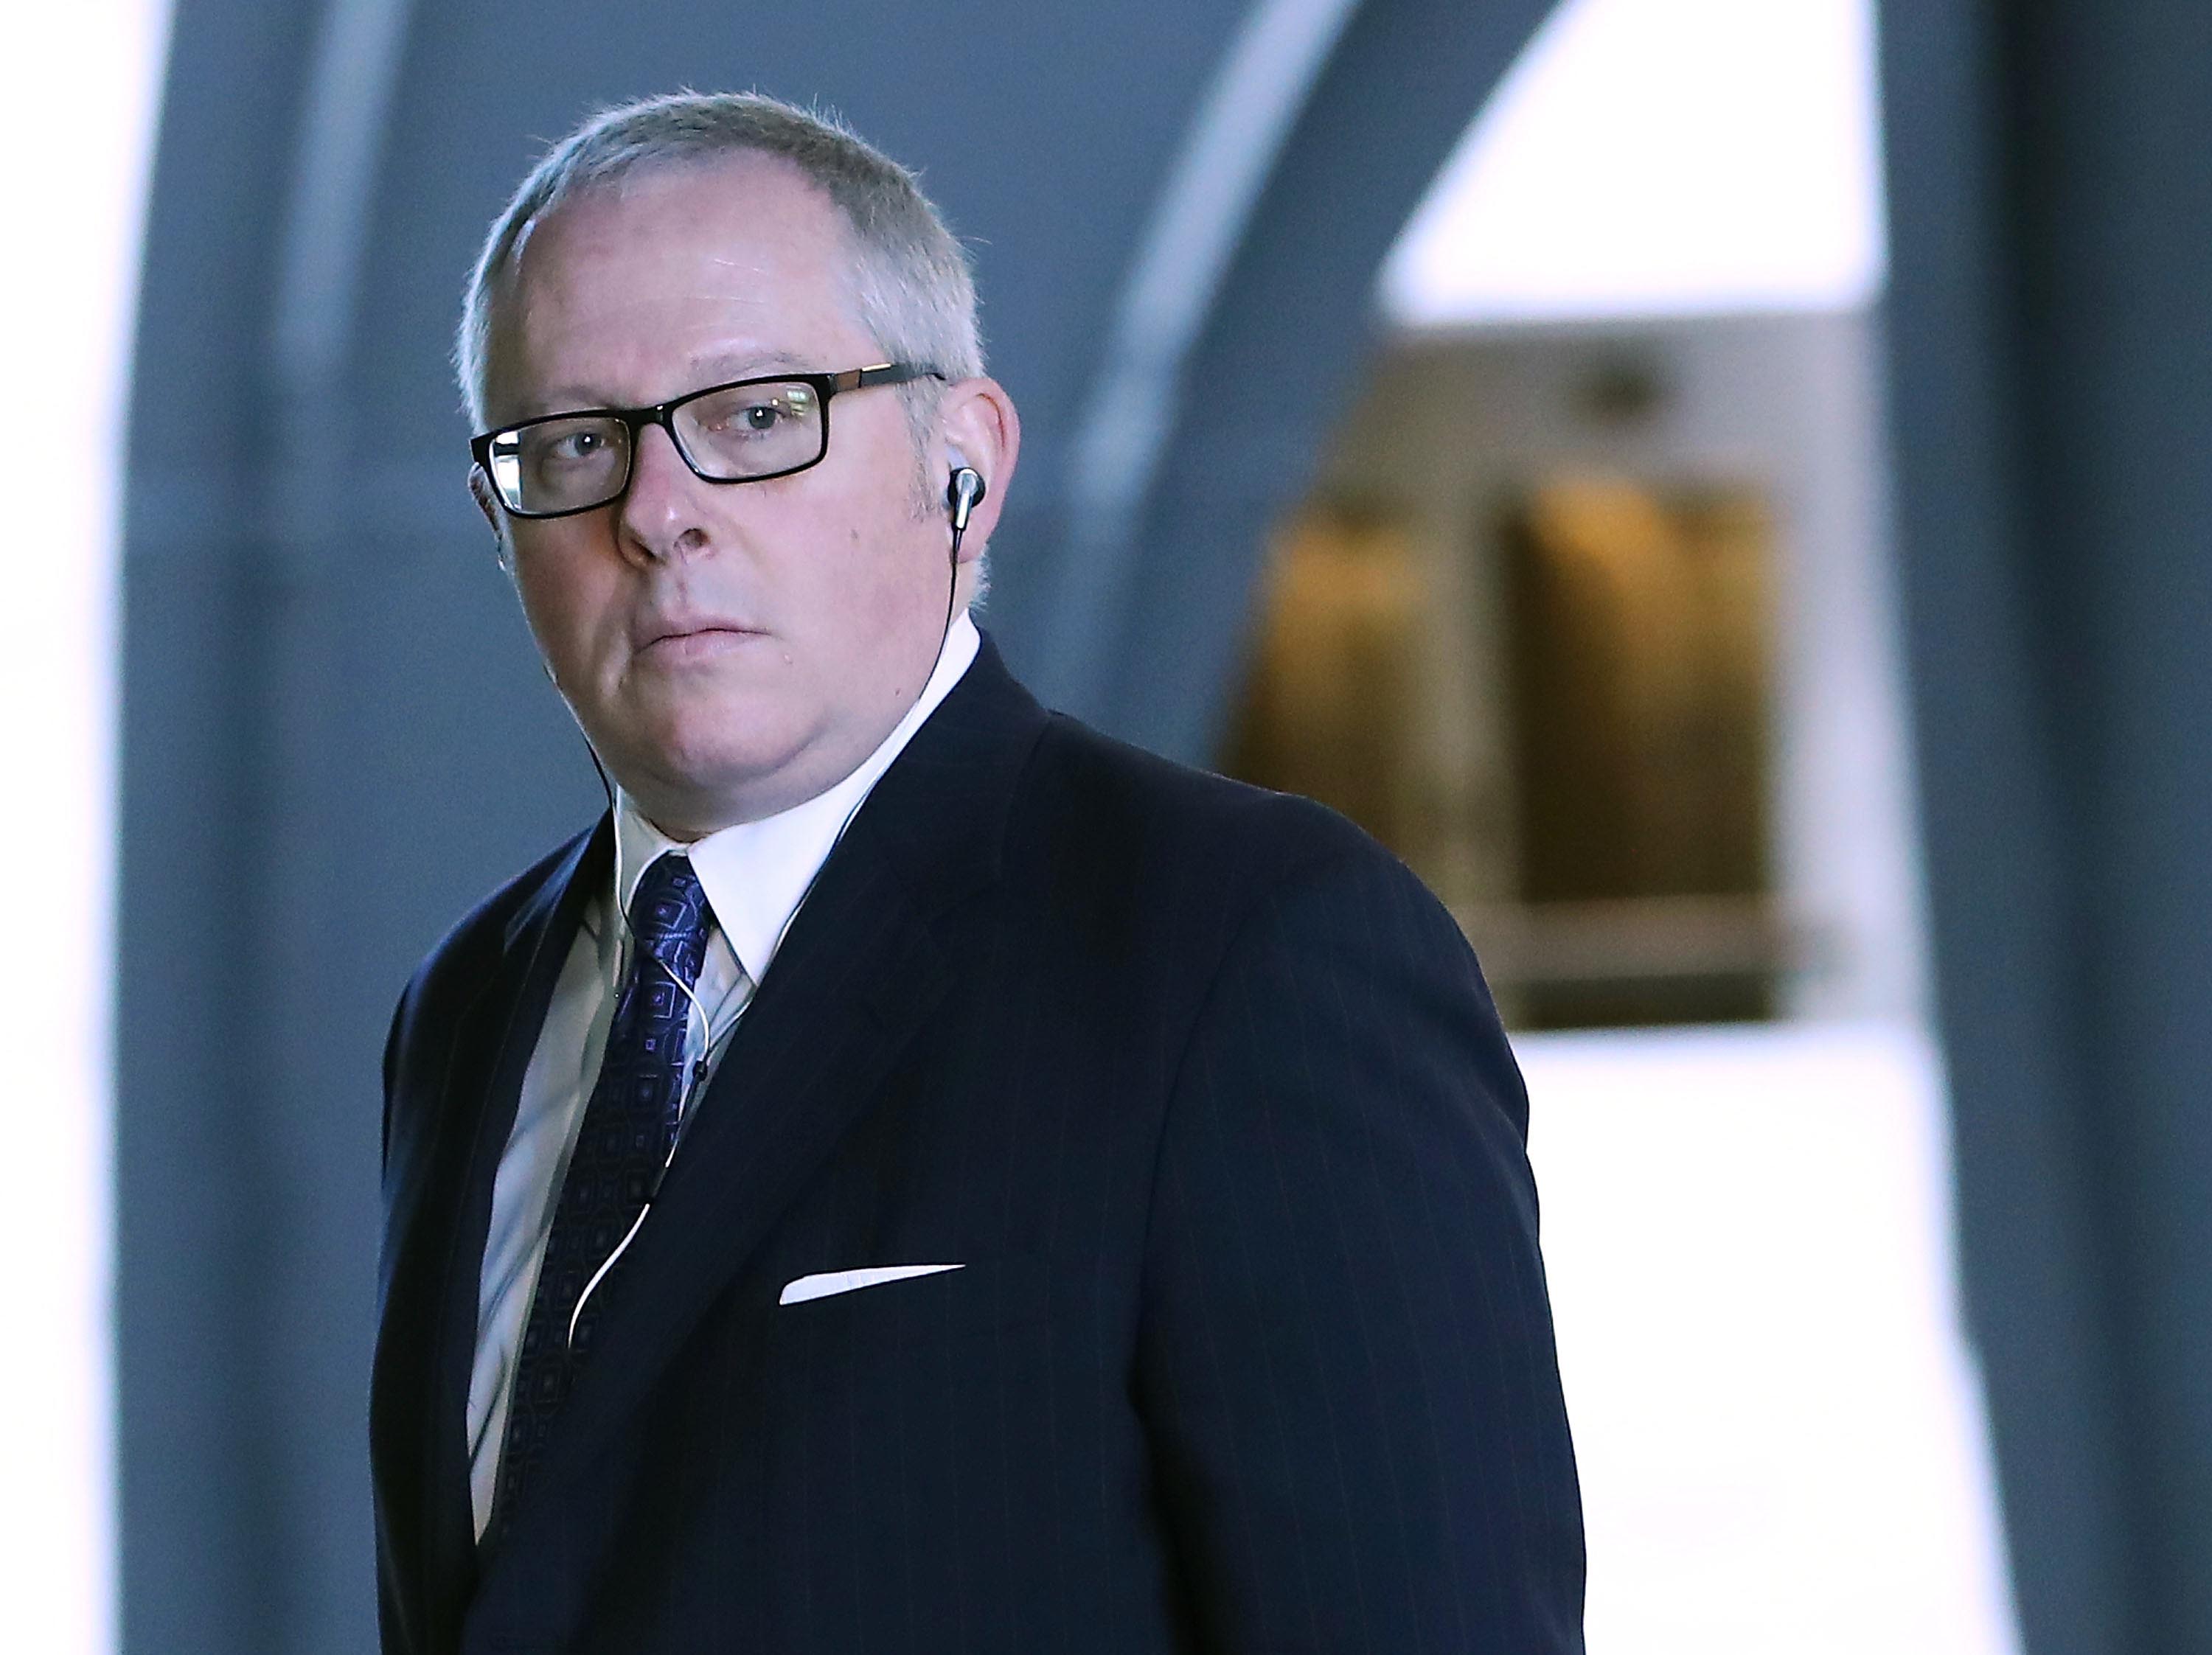 Michael Caputo diagnosed with cancer